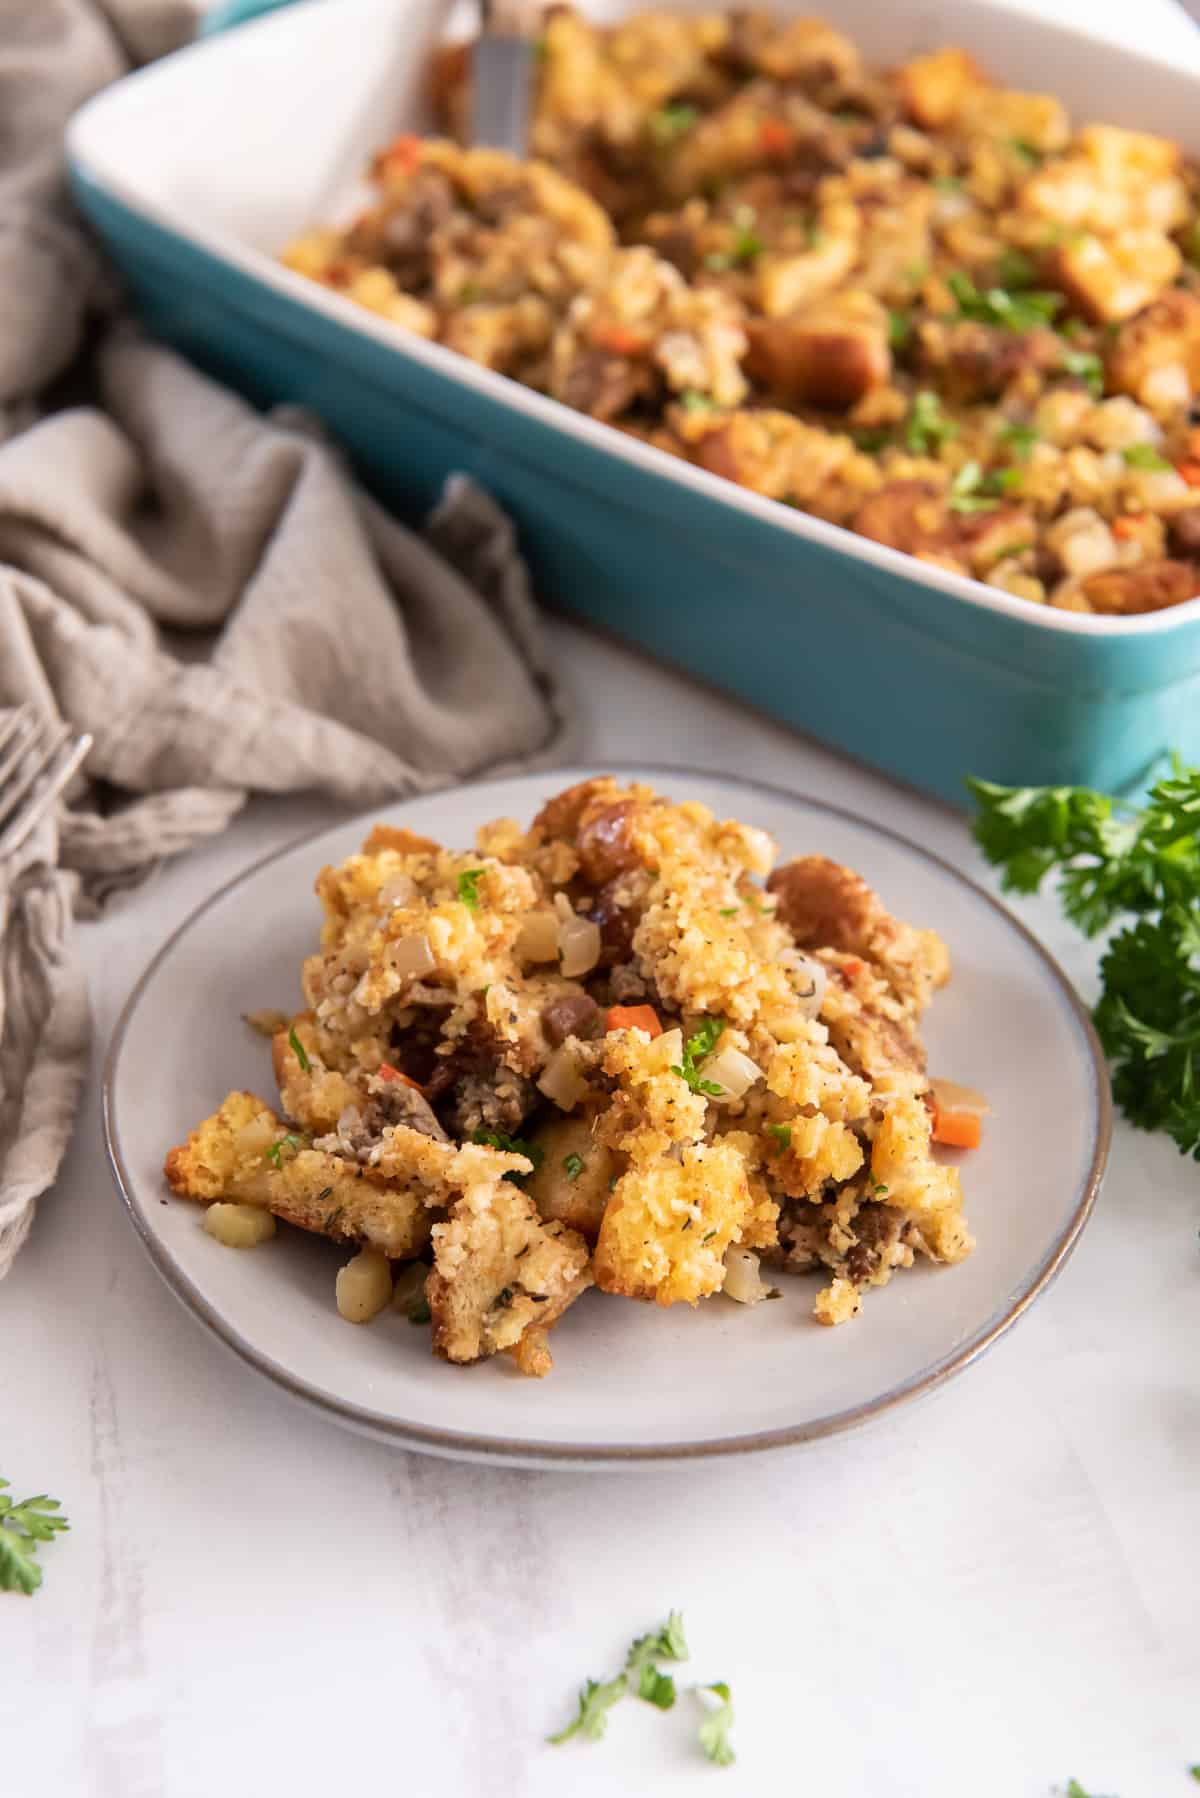 A serving of stuffing on a small white plate in front of a blue casserole dish.